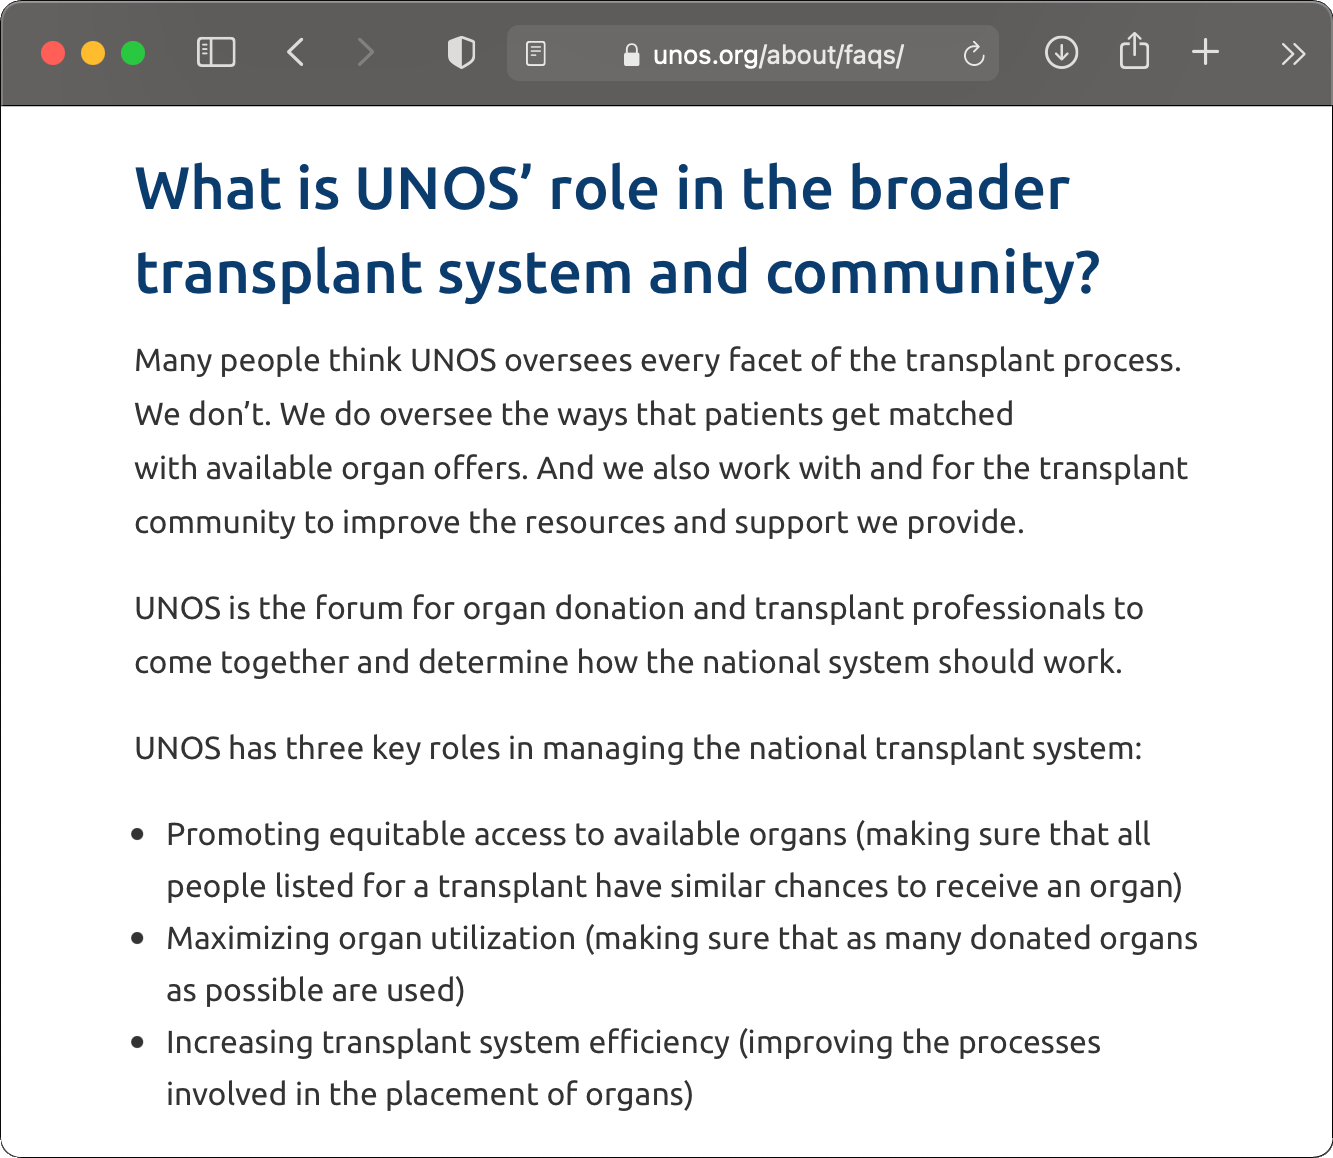 Screenshot of a UNOS.org FAQ question "What is UNOS' role in the broader transplant system and community?"